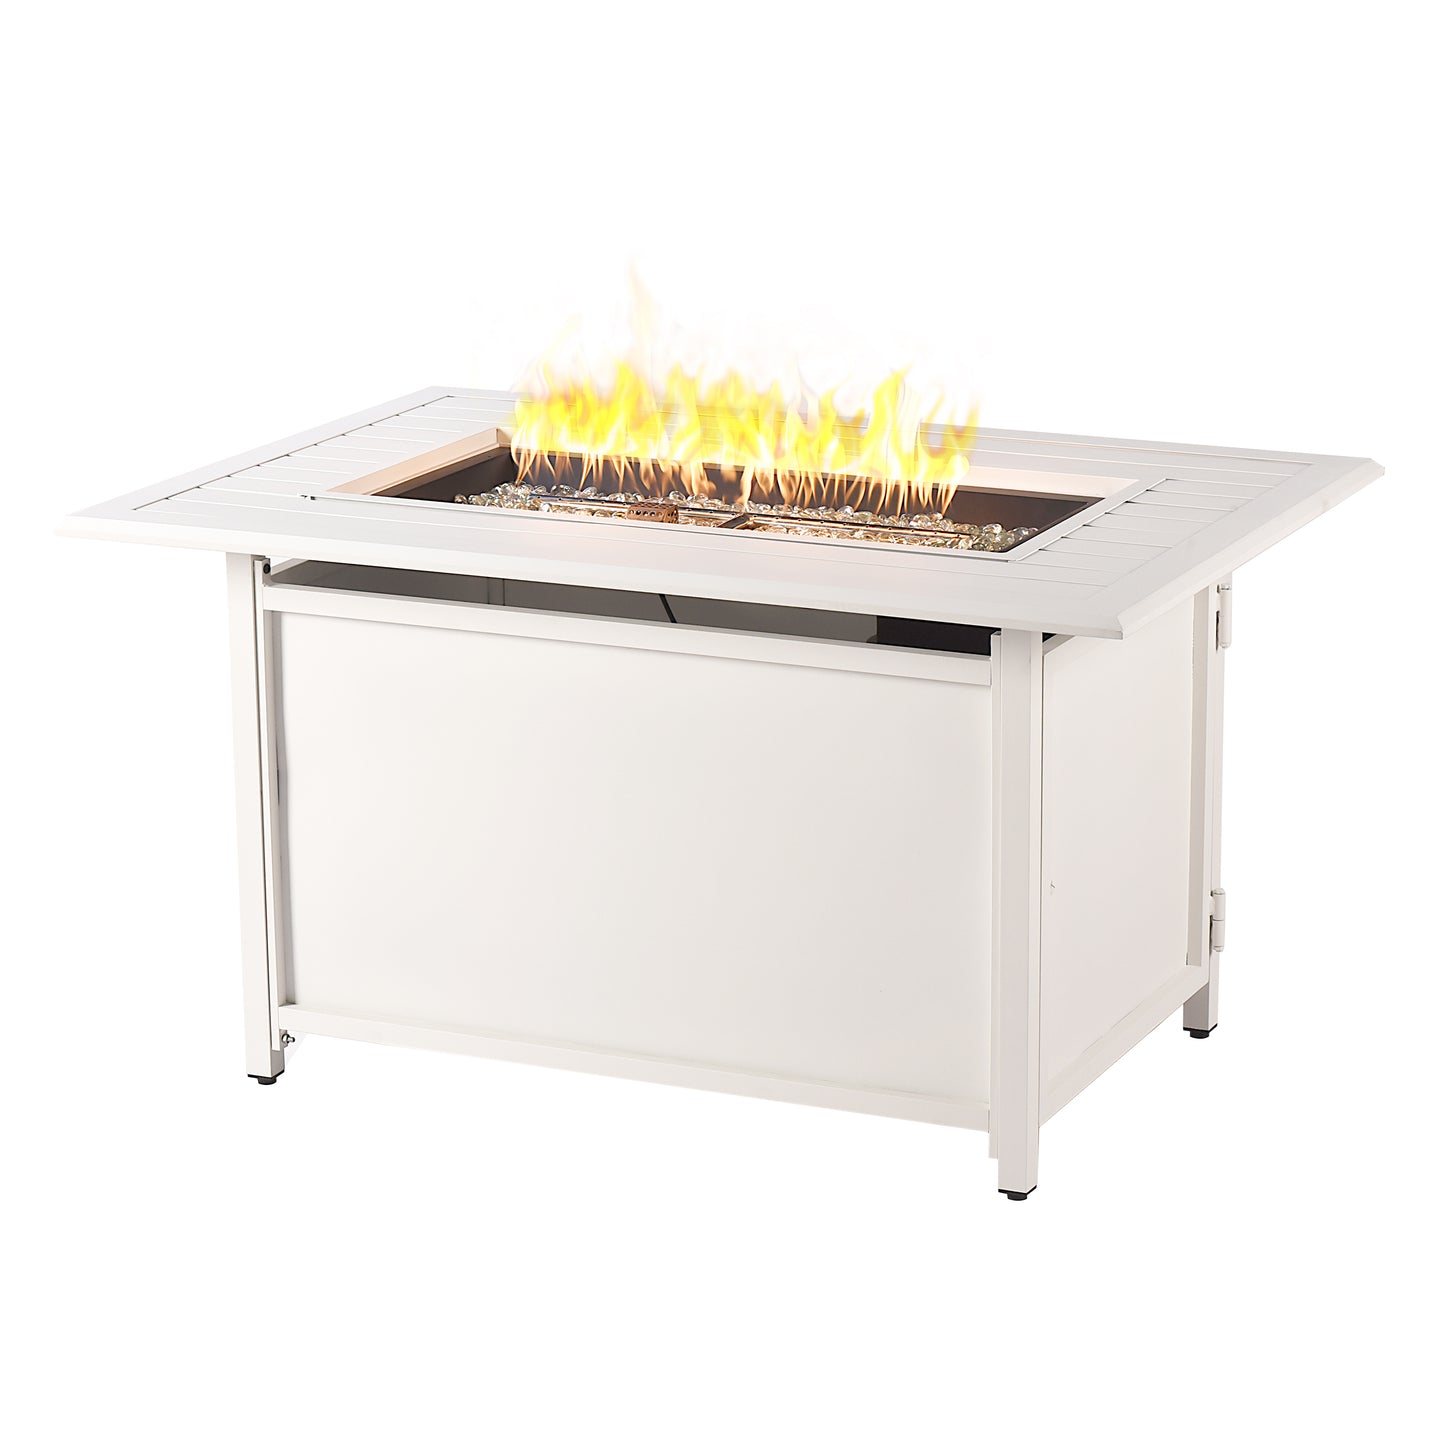 Aluminum 46-in Rectangular Propane Fire Table, Beads, Covers and Lid